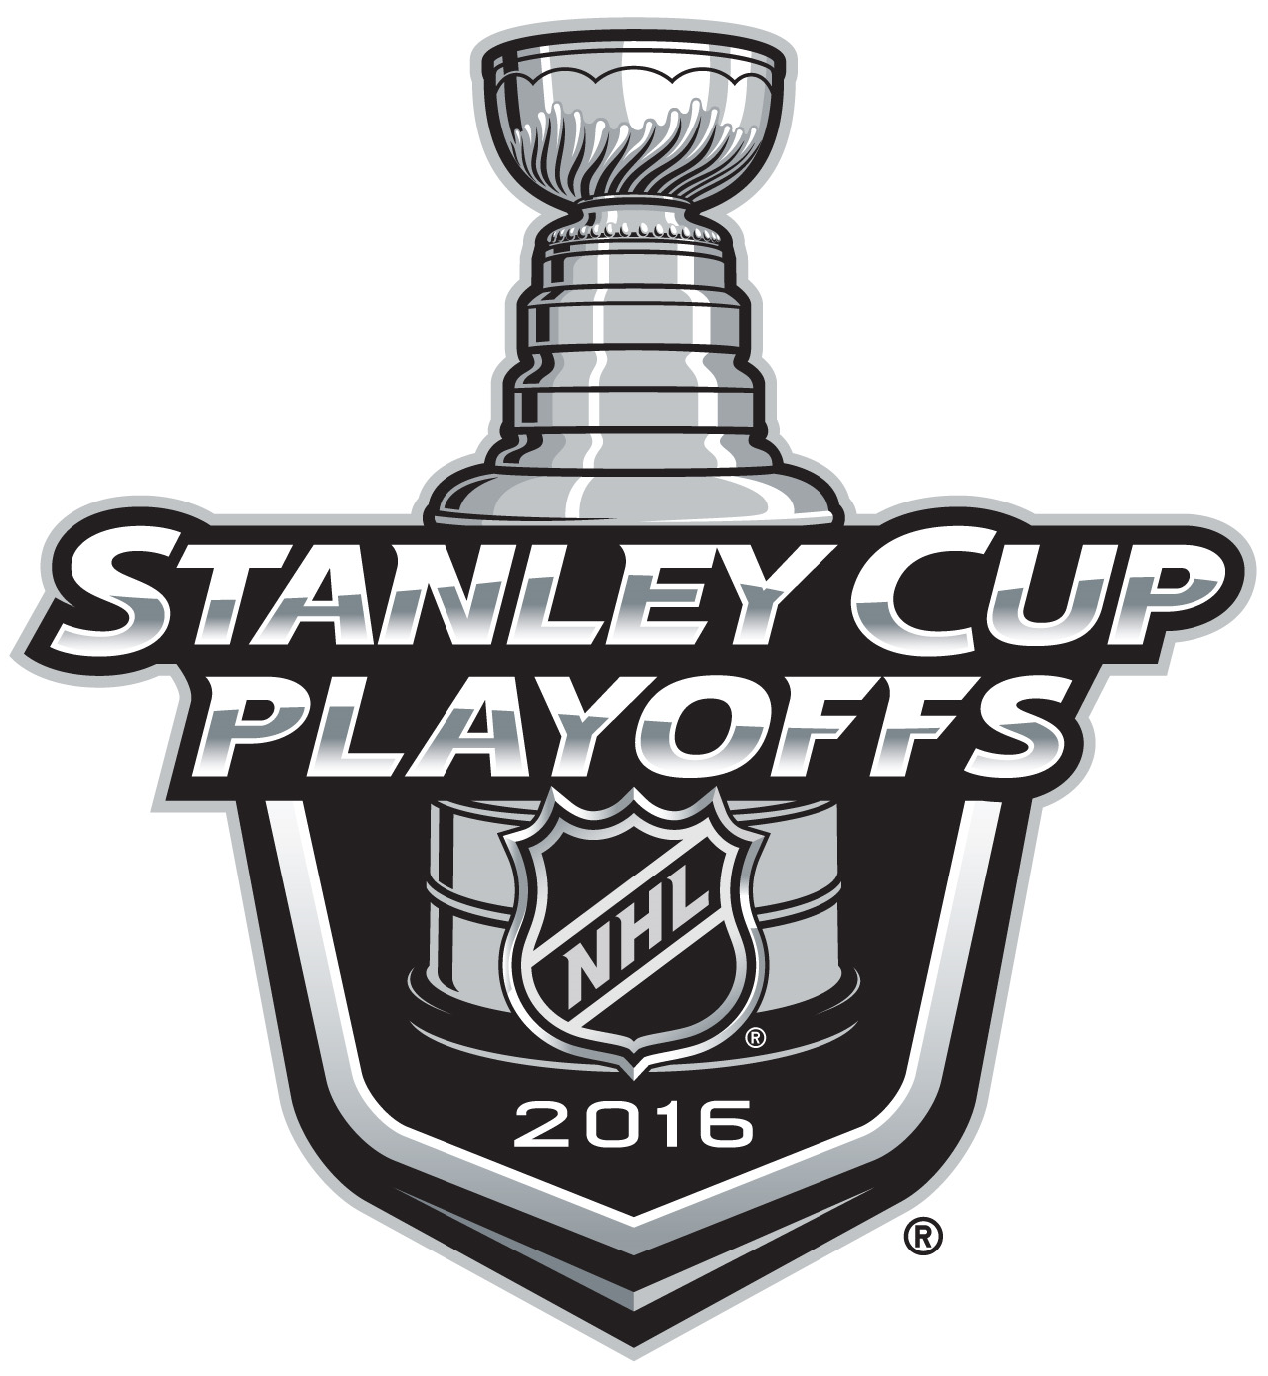 Stanley Cup Playoffs 2016 Primary Logo iron on heat transfer